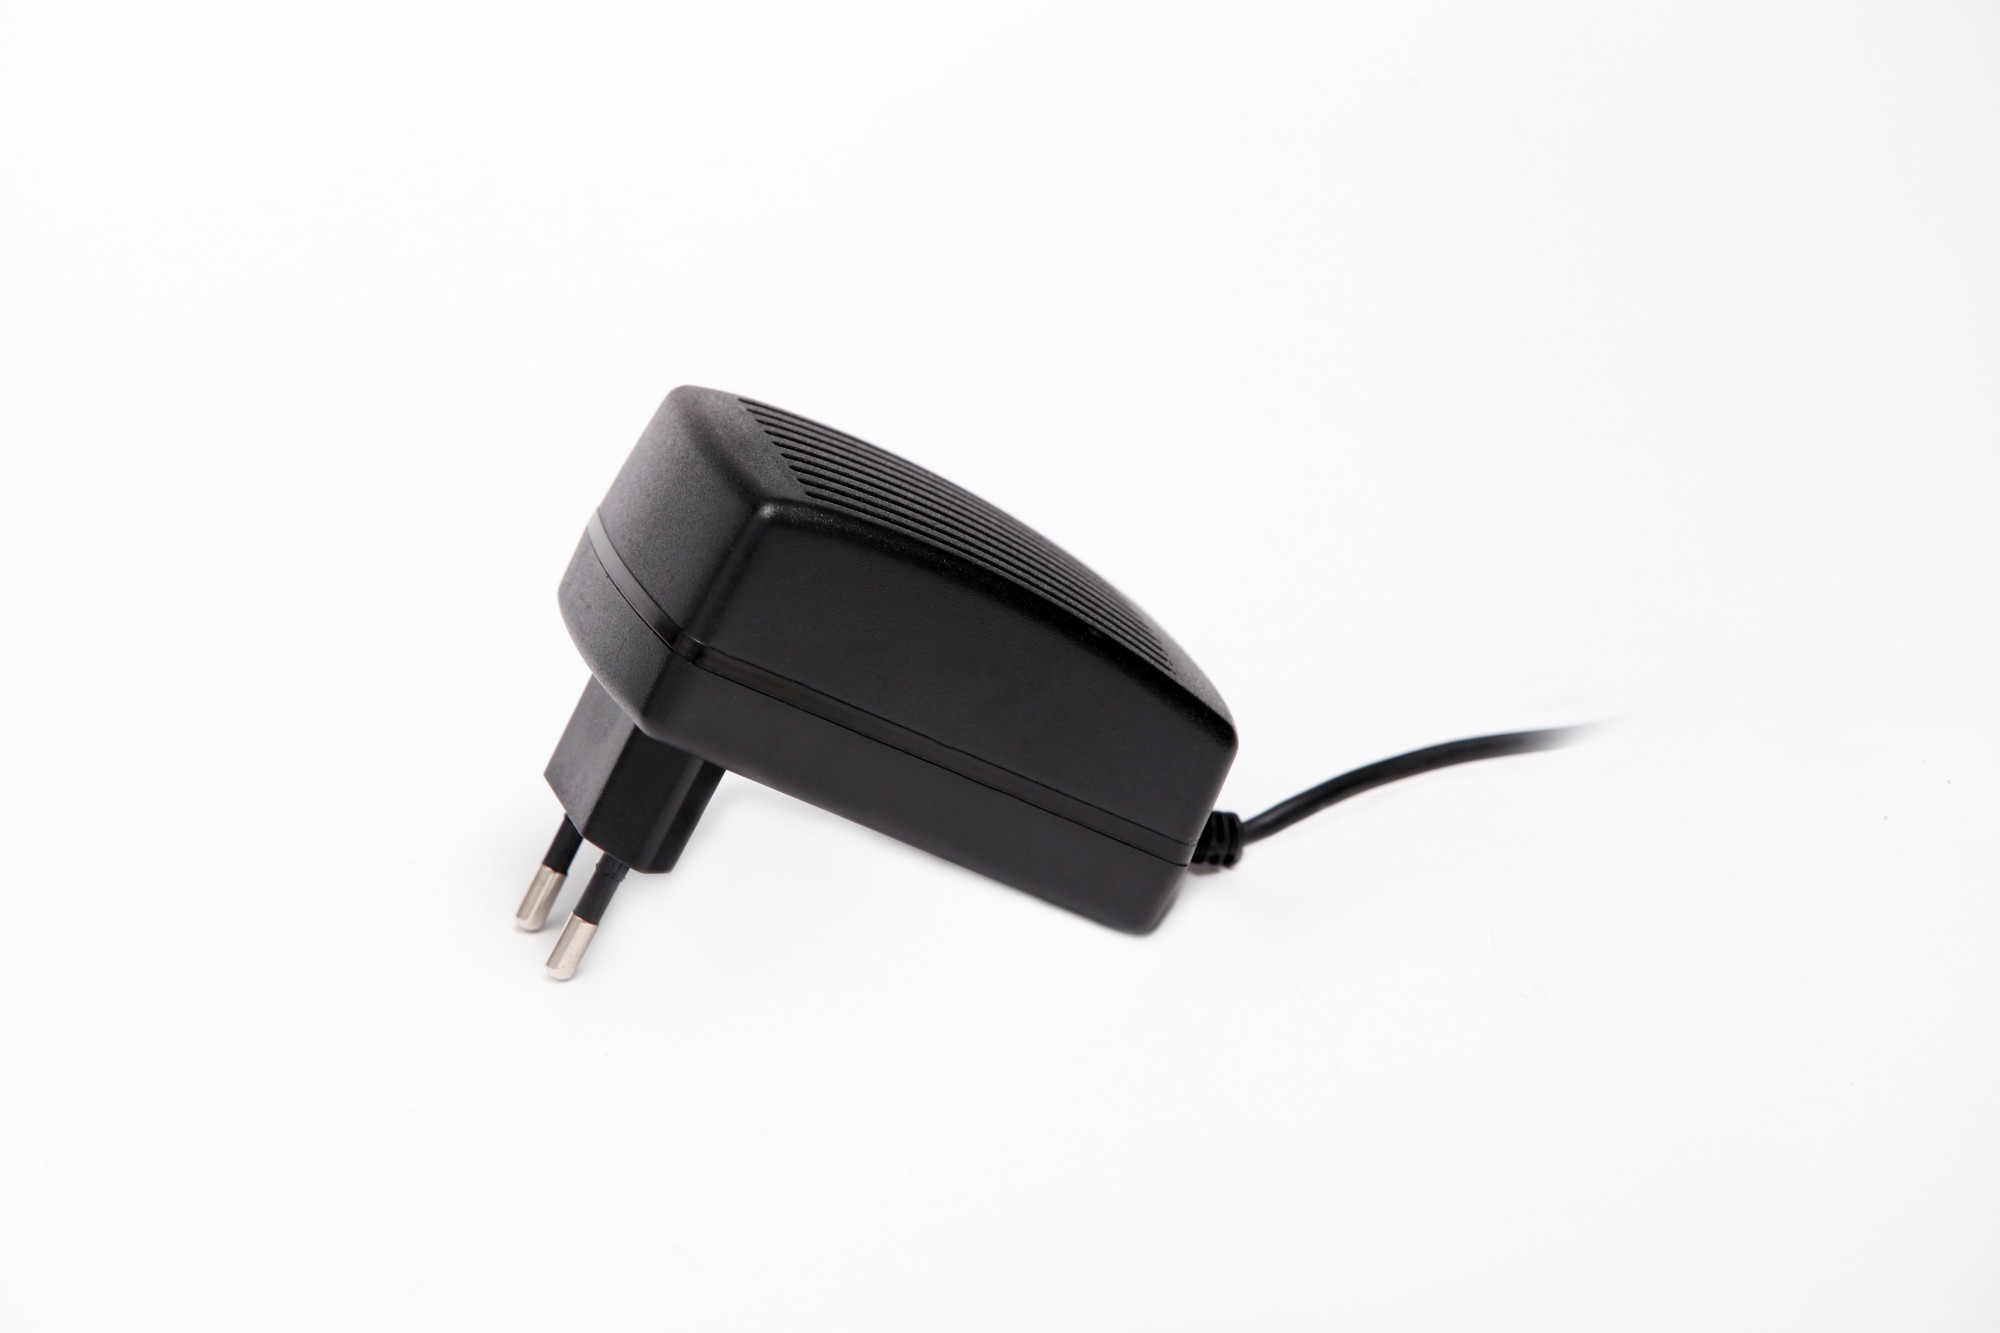 Pop-Up Round Single Port USB Charger in Black Chrome